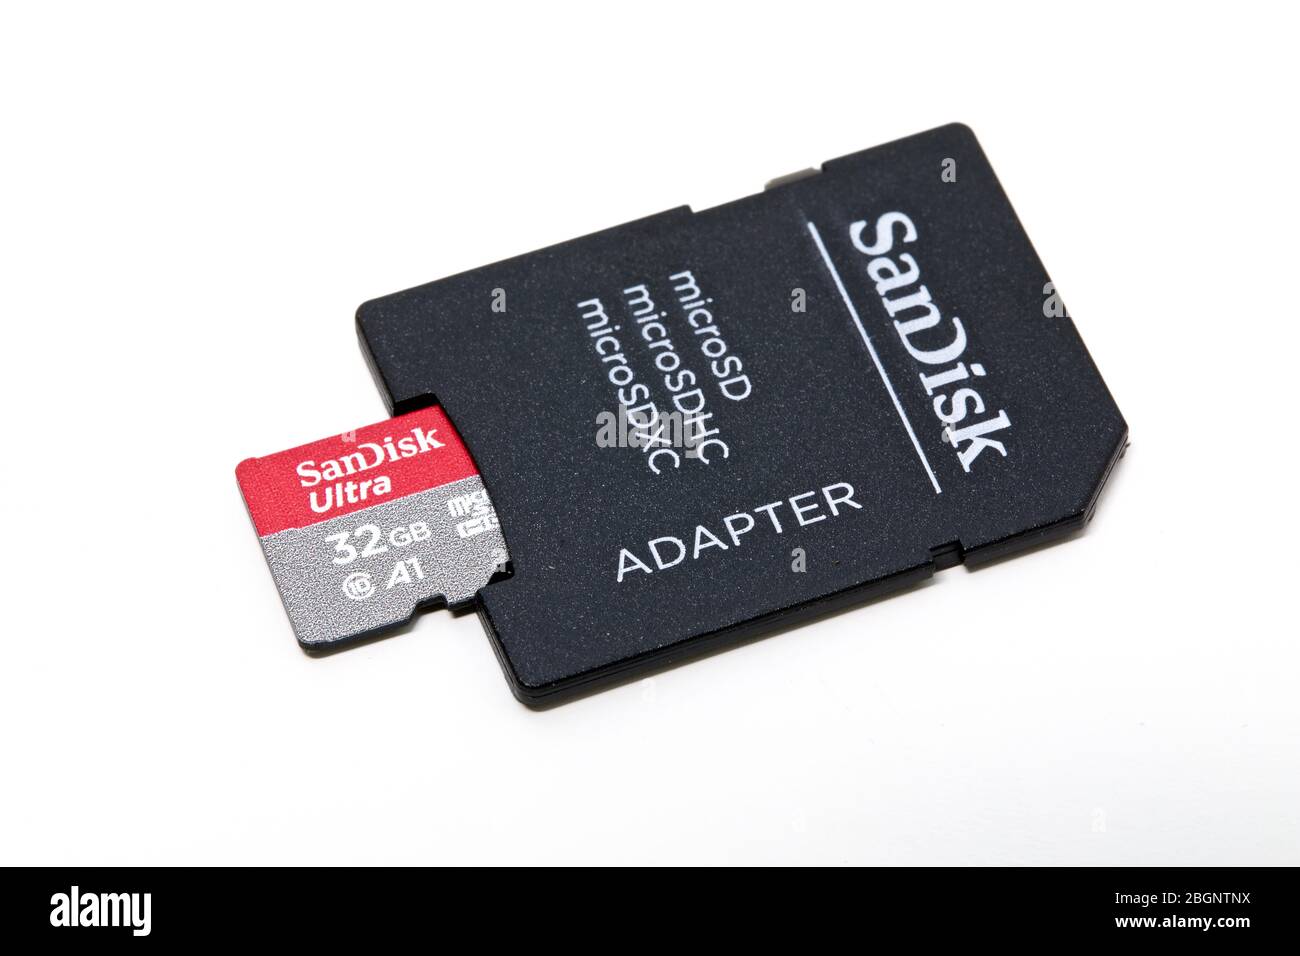 Sandisk Micro Sd Card And Adapter Stock Photo Alamy